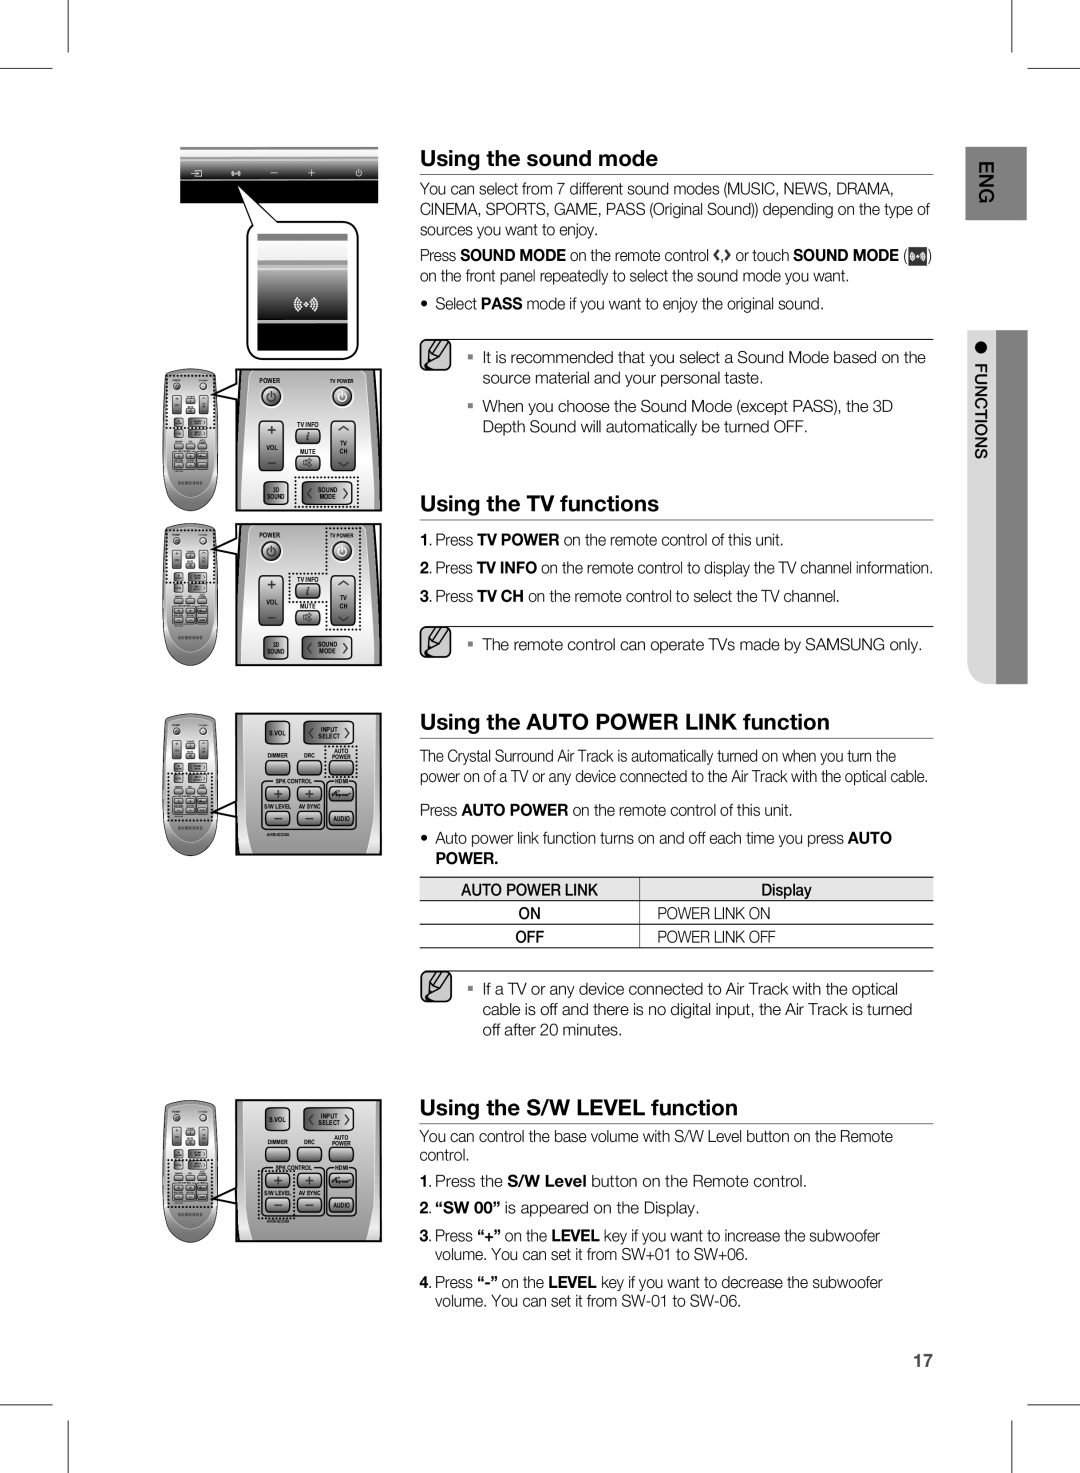 Siemens HW-D450 user manual Using the sound mode, Using the TV functions, Using the AUTO POWER LINK function, Power 